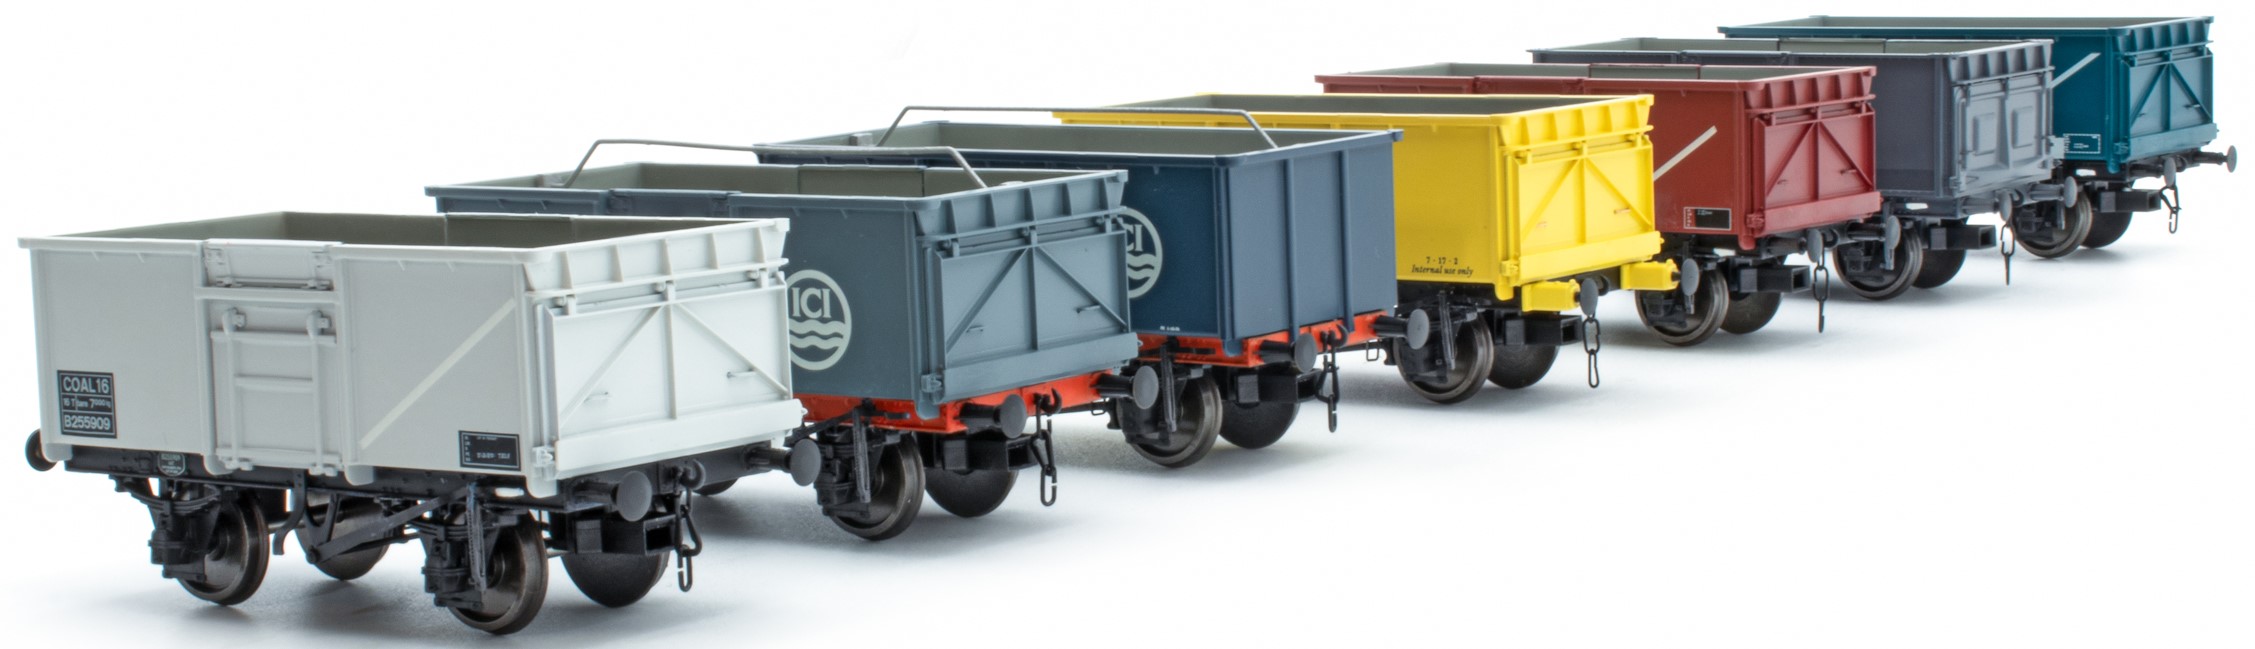 Accurascale OO Gauge (1:76 Scale) 16 ton steel mineral